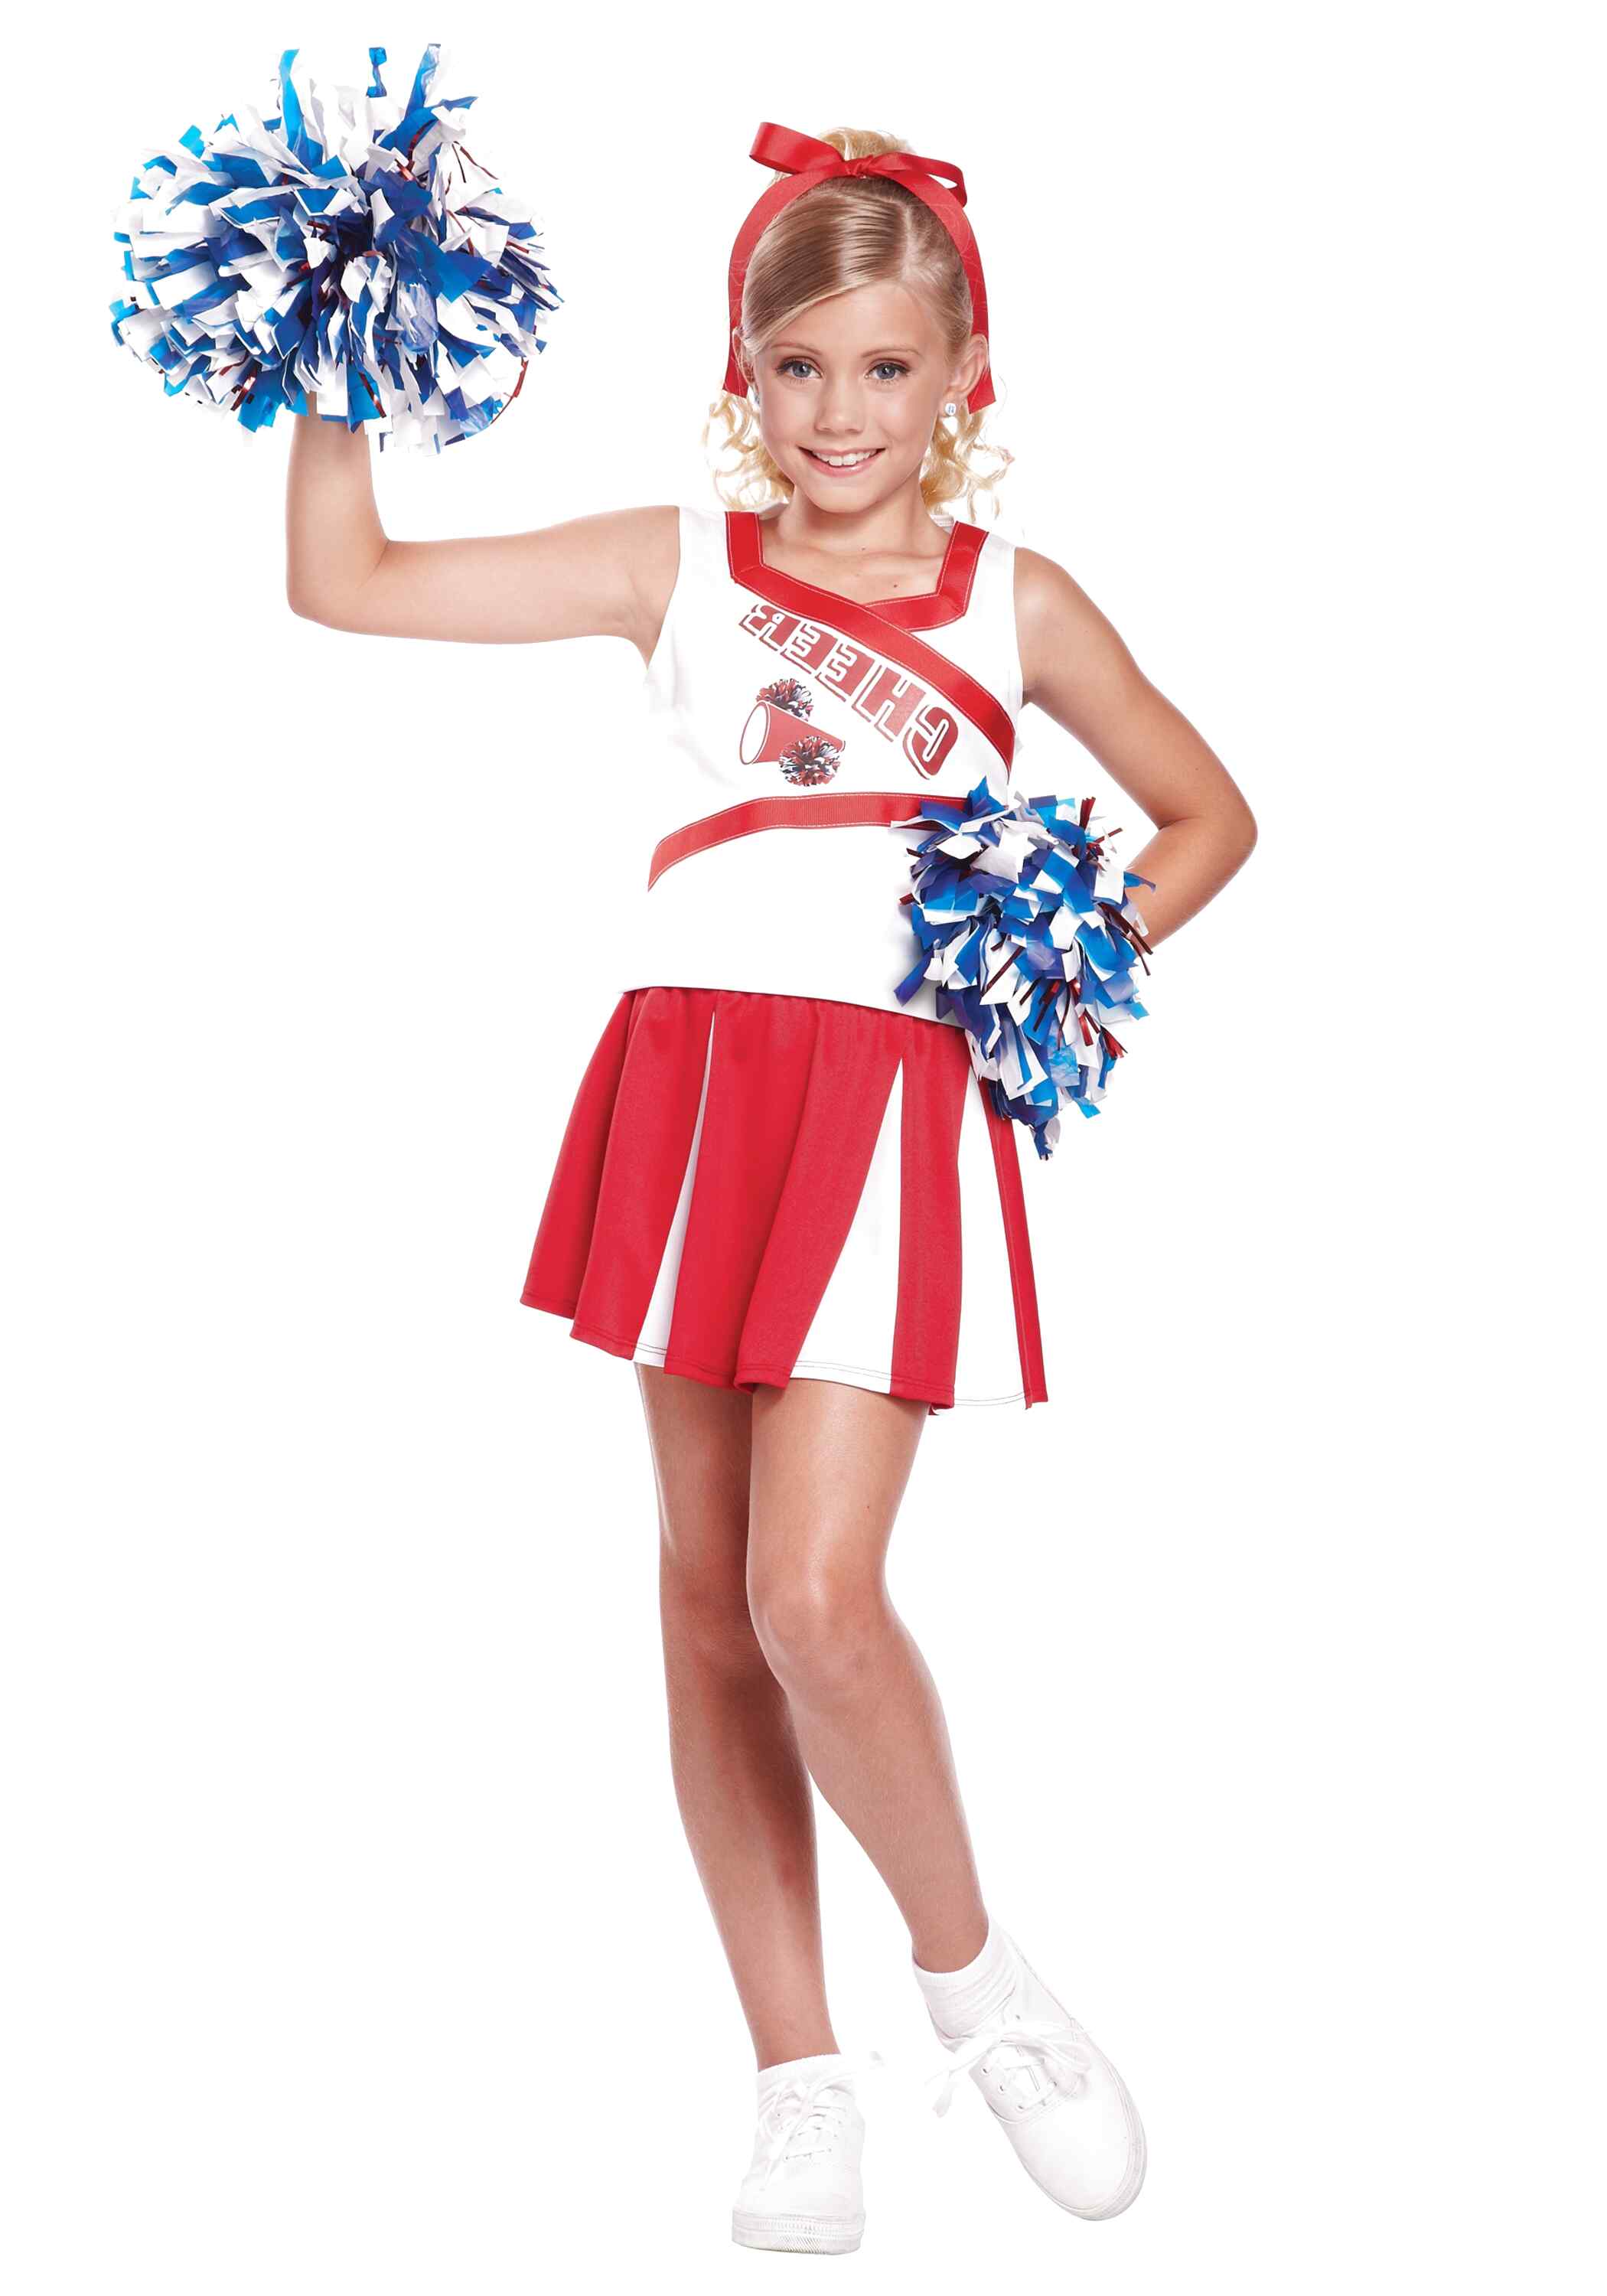 Kids Cheerleader Outfit for sale in UK | 57 used Kids Cheerleader Outfits